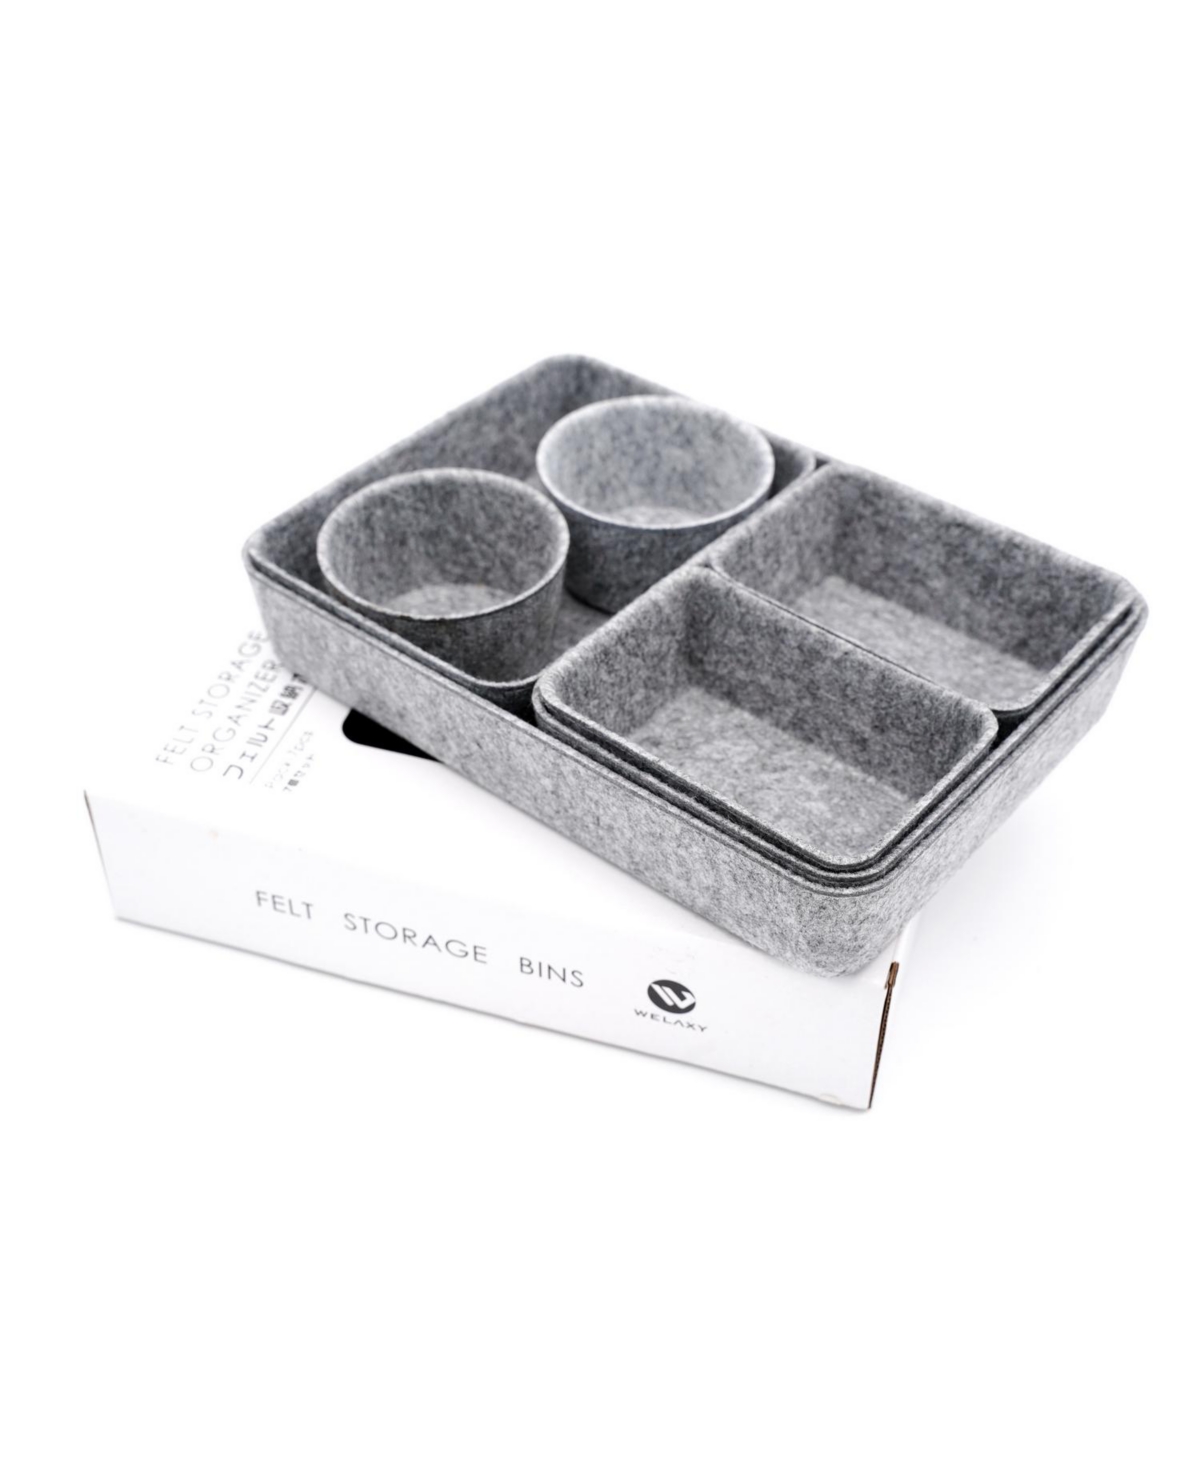 7 Piece Felt Drawer Organizer Set with Round Cups and Trays - Gray